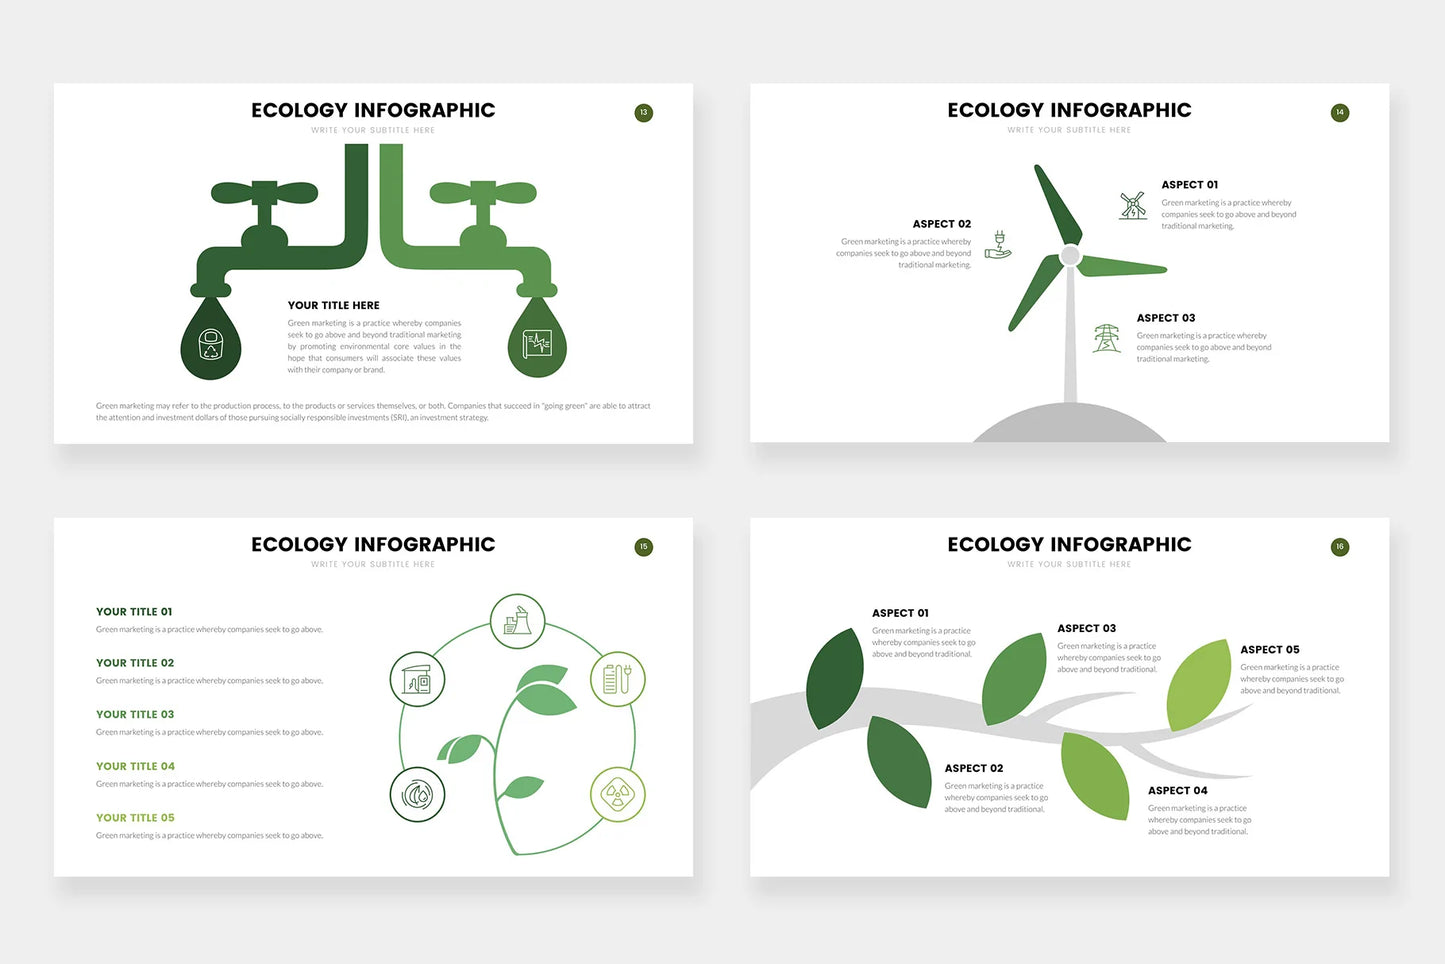 Ecology Infographic Templates PowerPoint slides